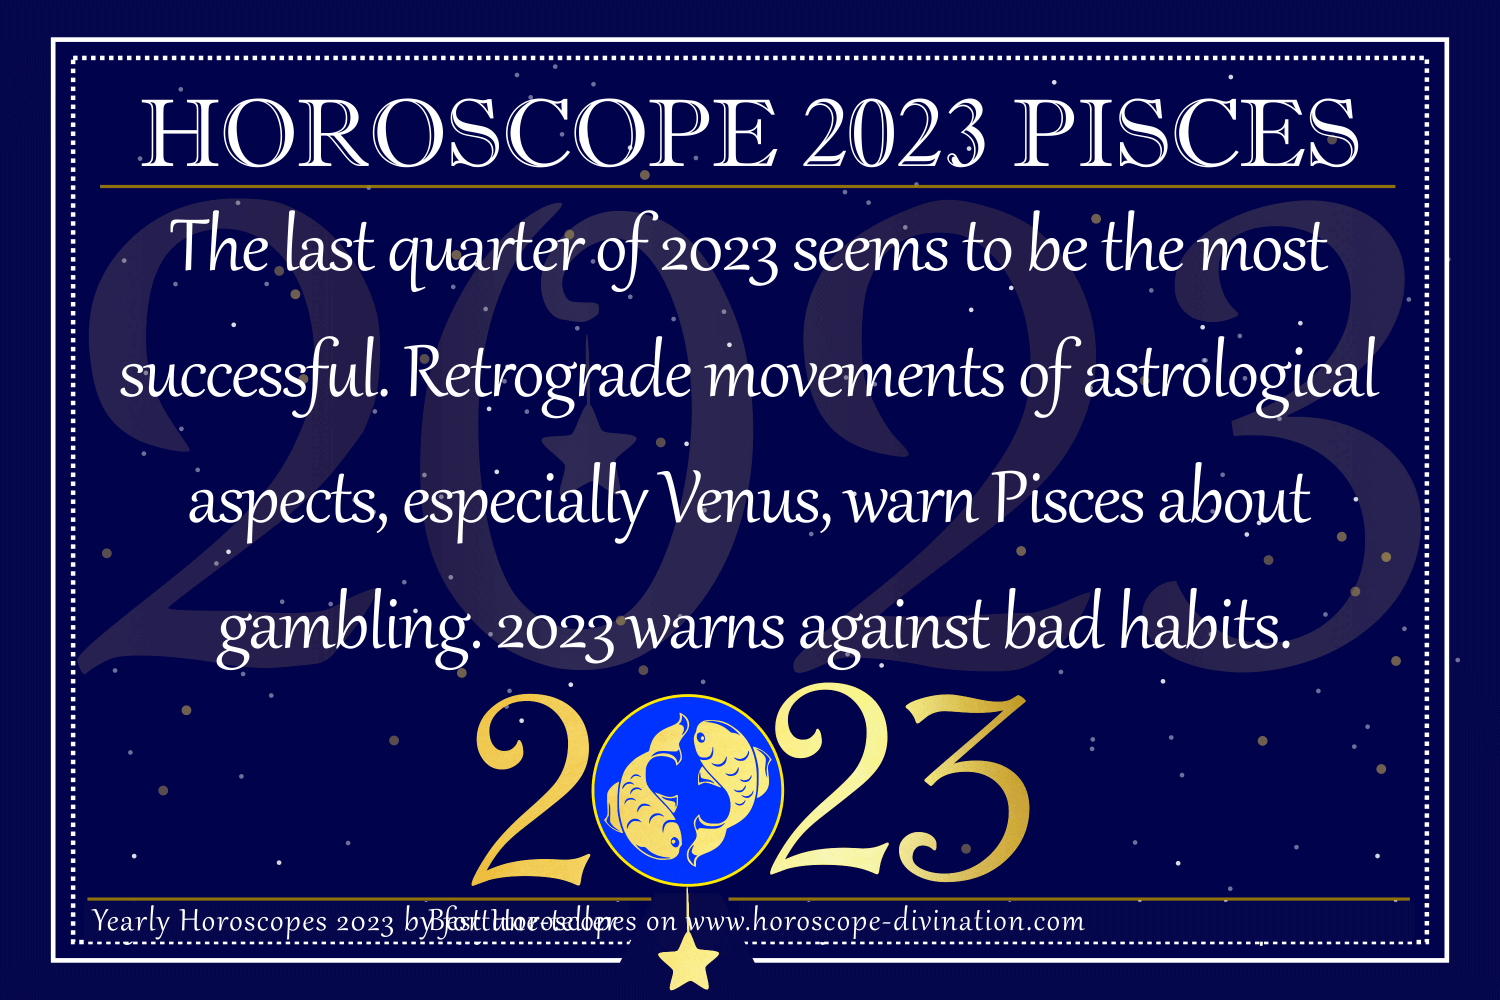 Yearly Horoscope Pisces 2023's Positive & Negative News for Pisces